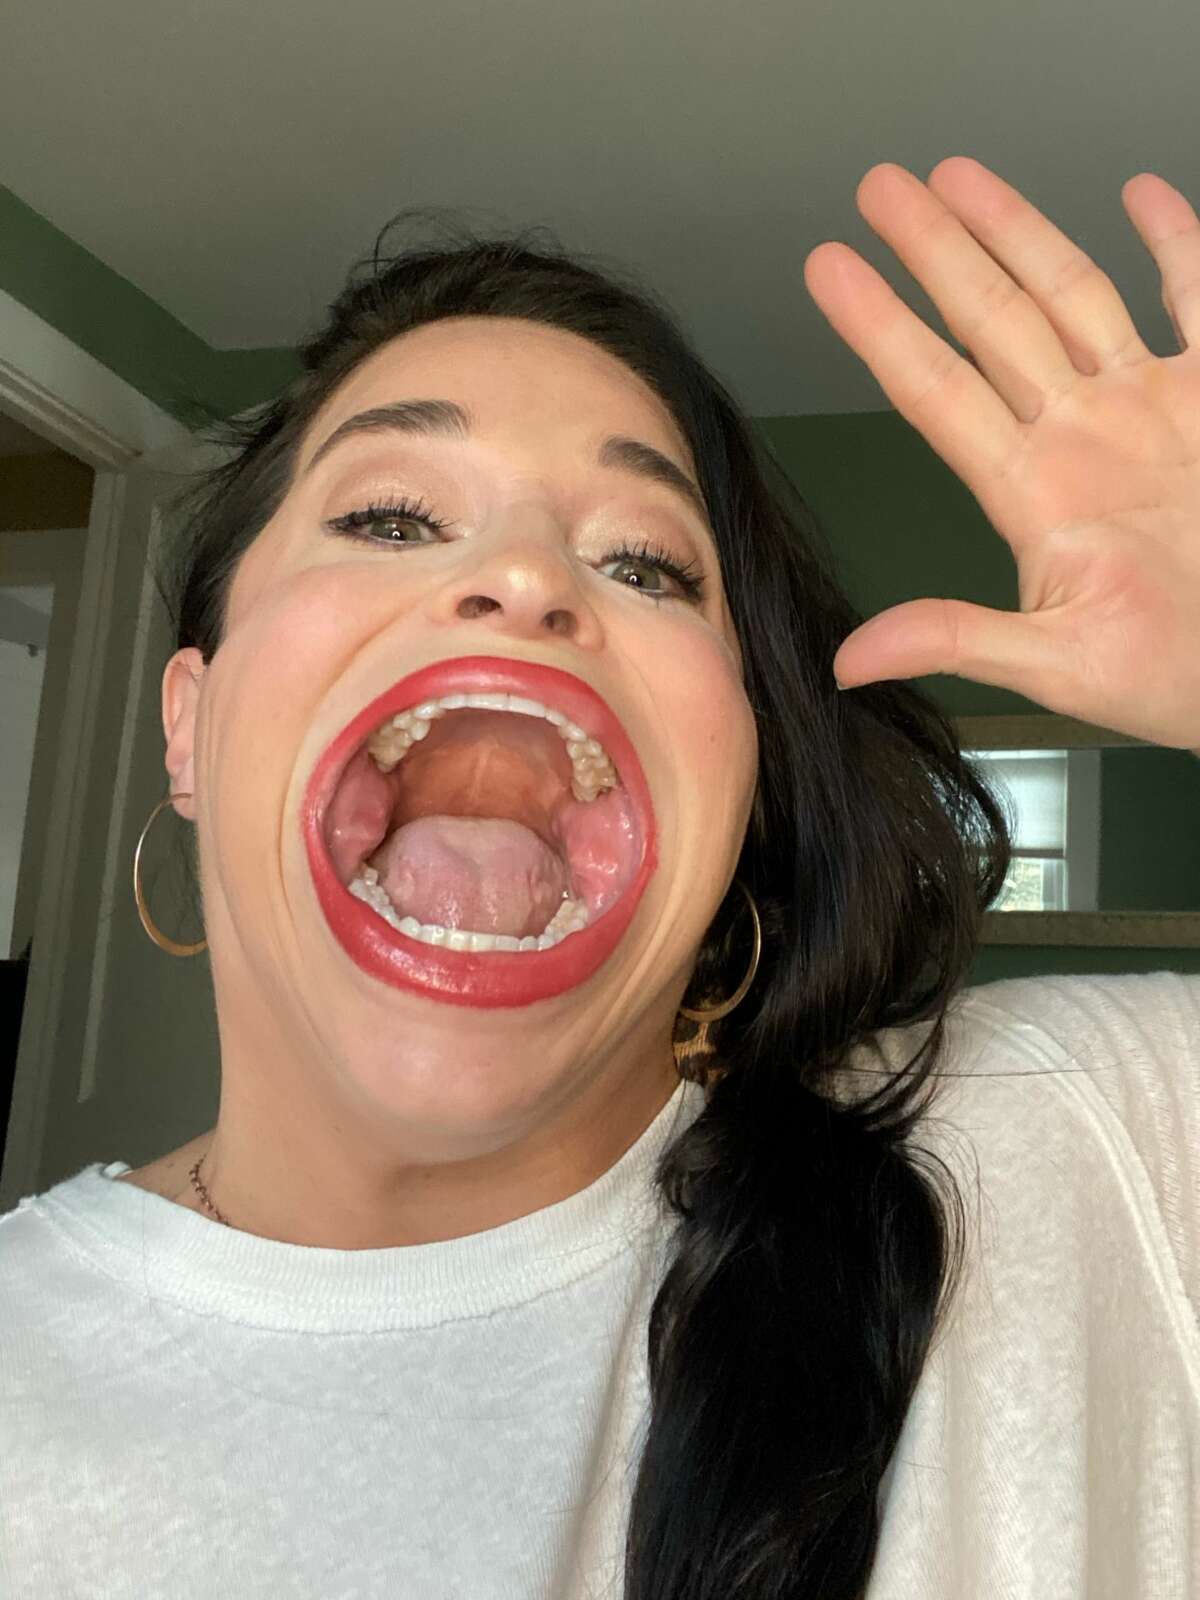 Stamford Woman Sets Guinness World Record For Largest Mouth Gape 6673